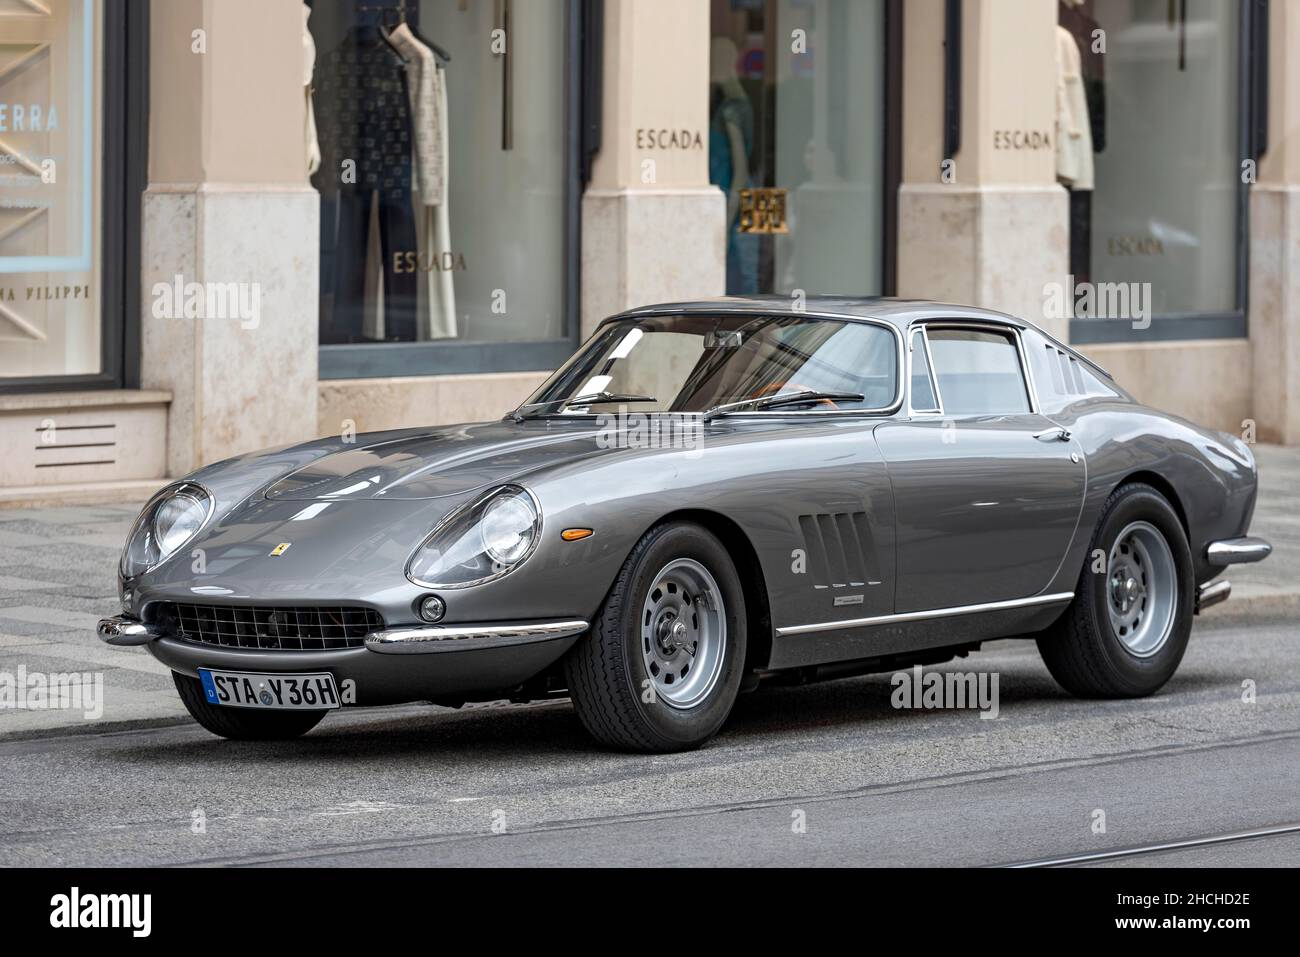 Parked vintage sports car Ferrari 275 GTB4, year of construction 1966 in front of exclusive fashion shop Escada, Maximilianstrasse, Munich, Upper Stock Photo